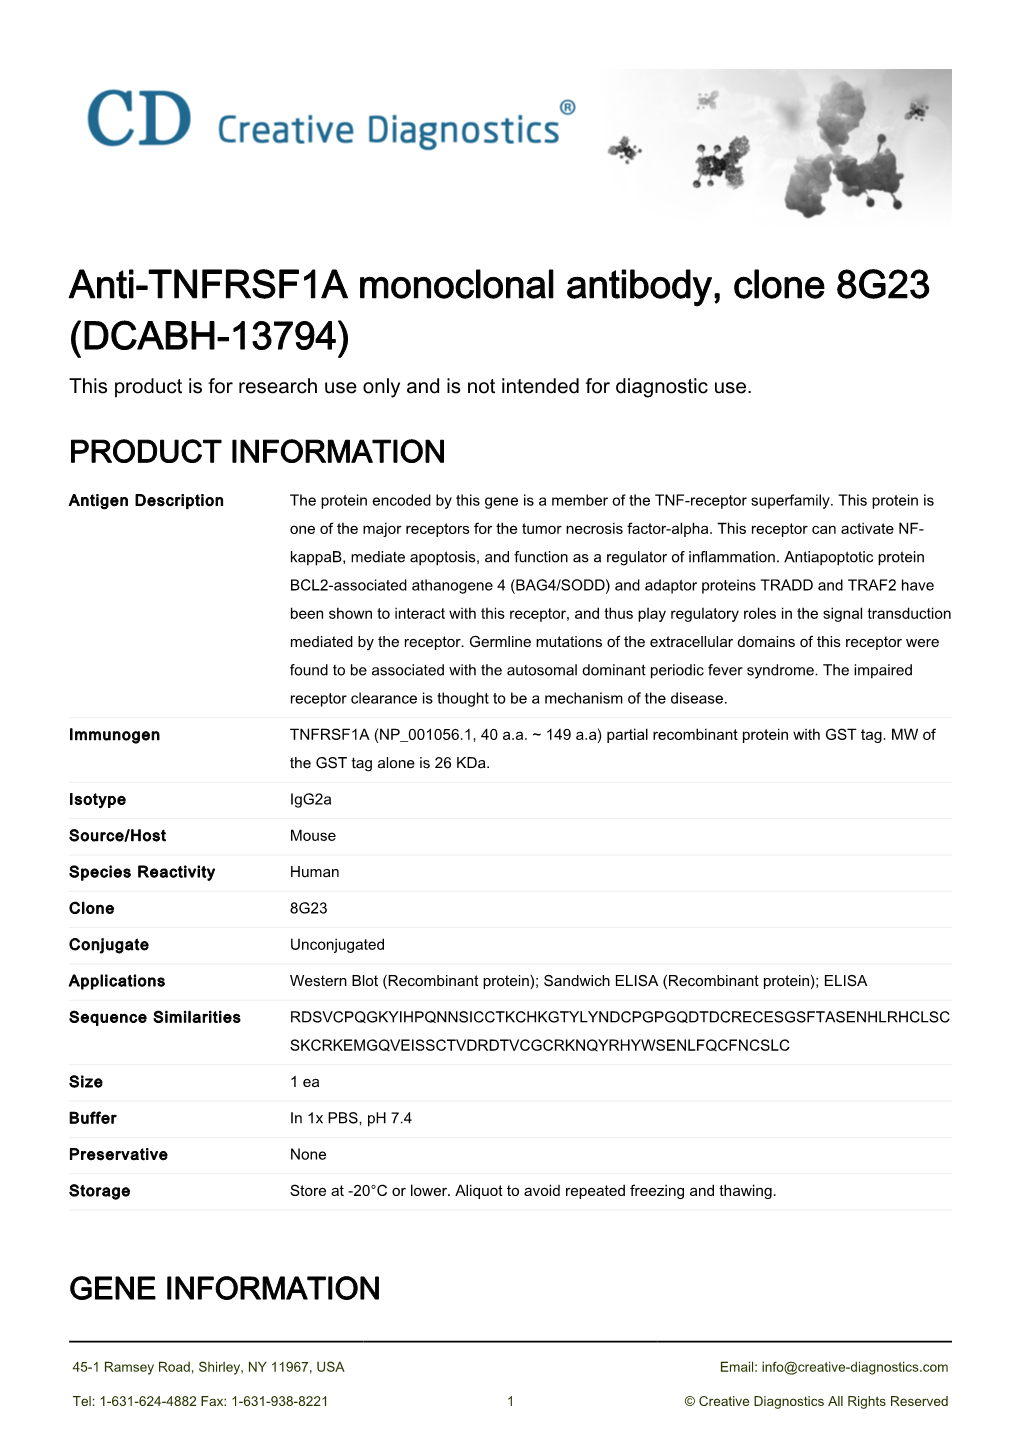 Anti-TNFRSF1A Monoclonal Antibody, Clone 8G23 (DCABH-13794) This Product Is for Research Use Only and Is Not Intended for Diagnostic Use